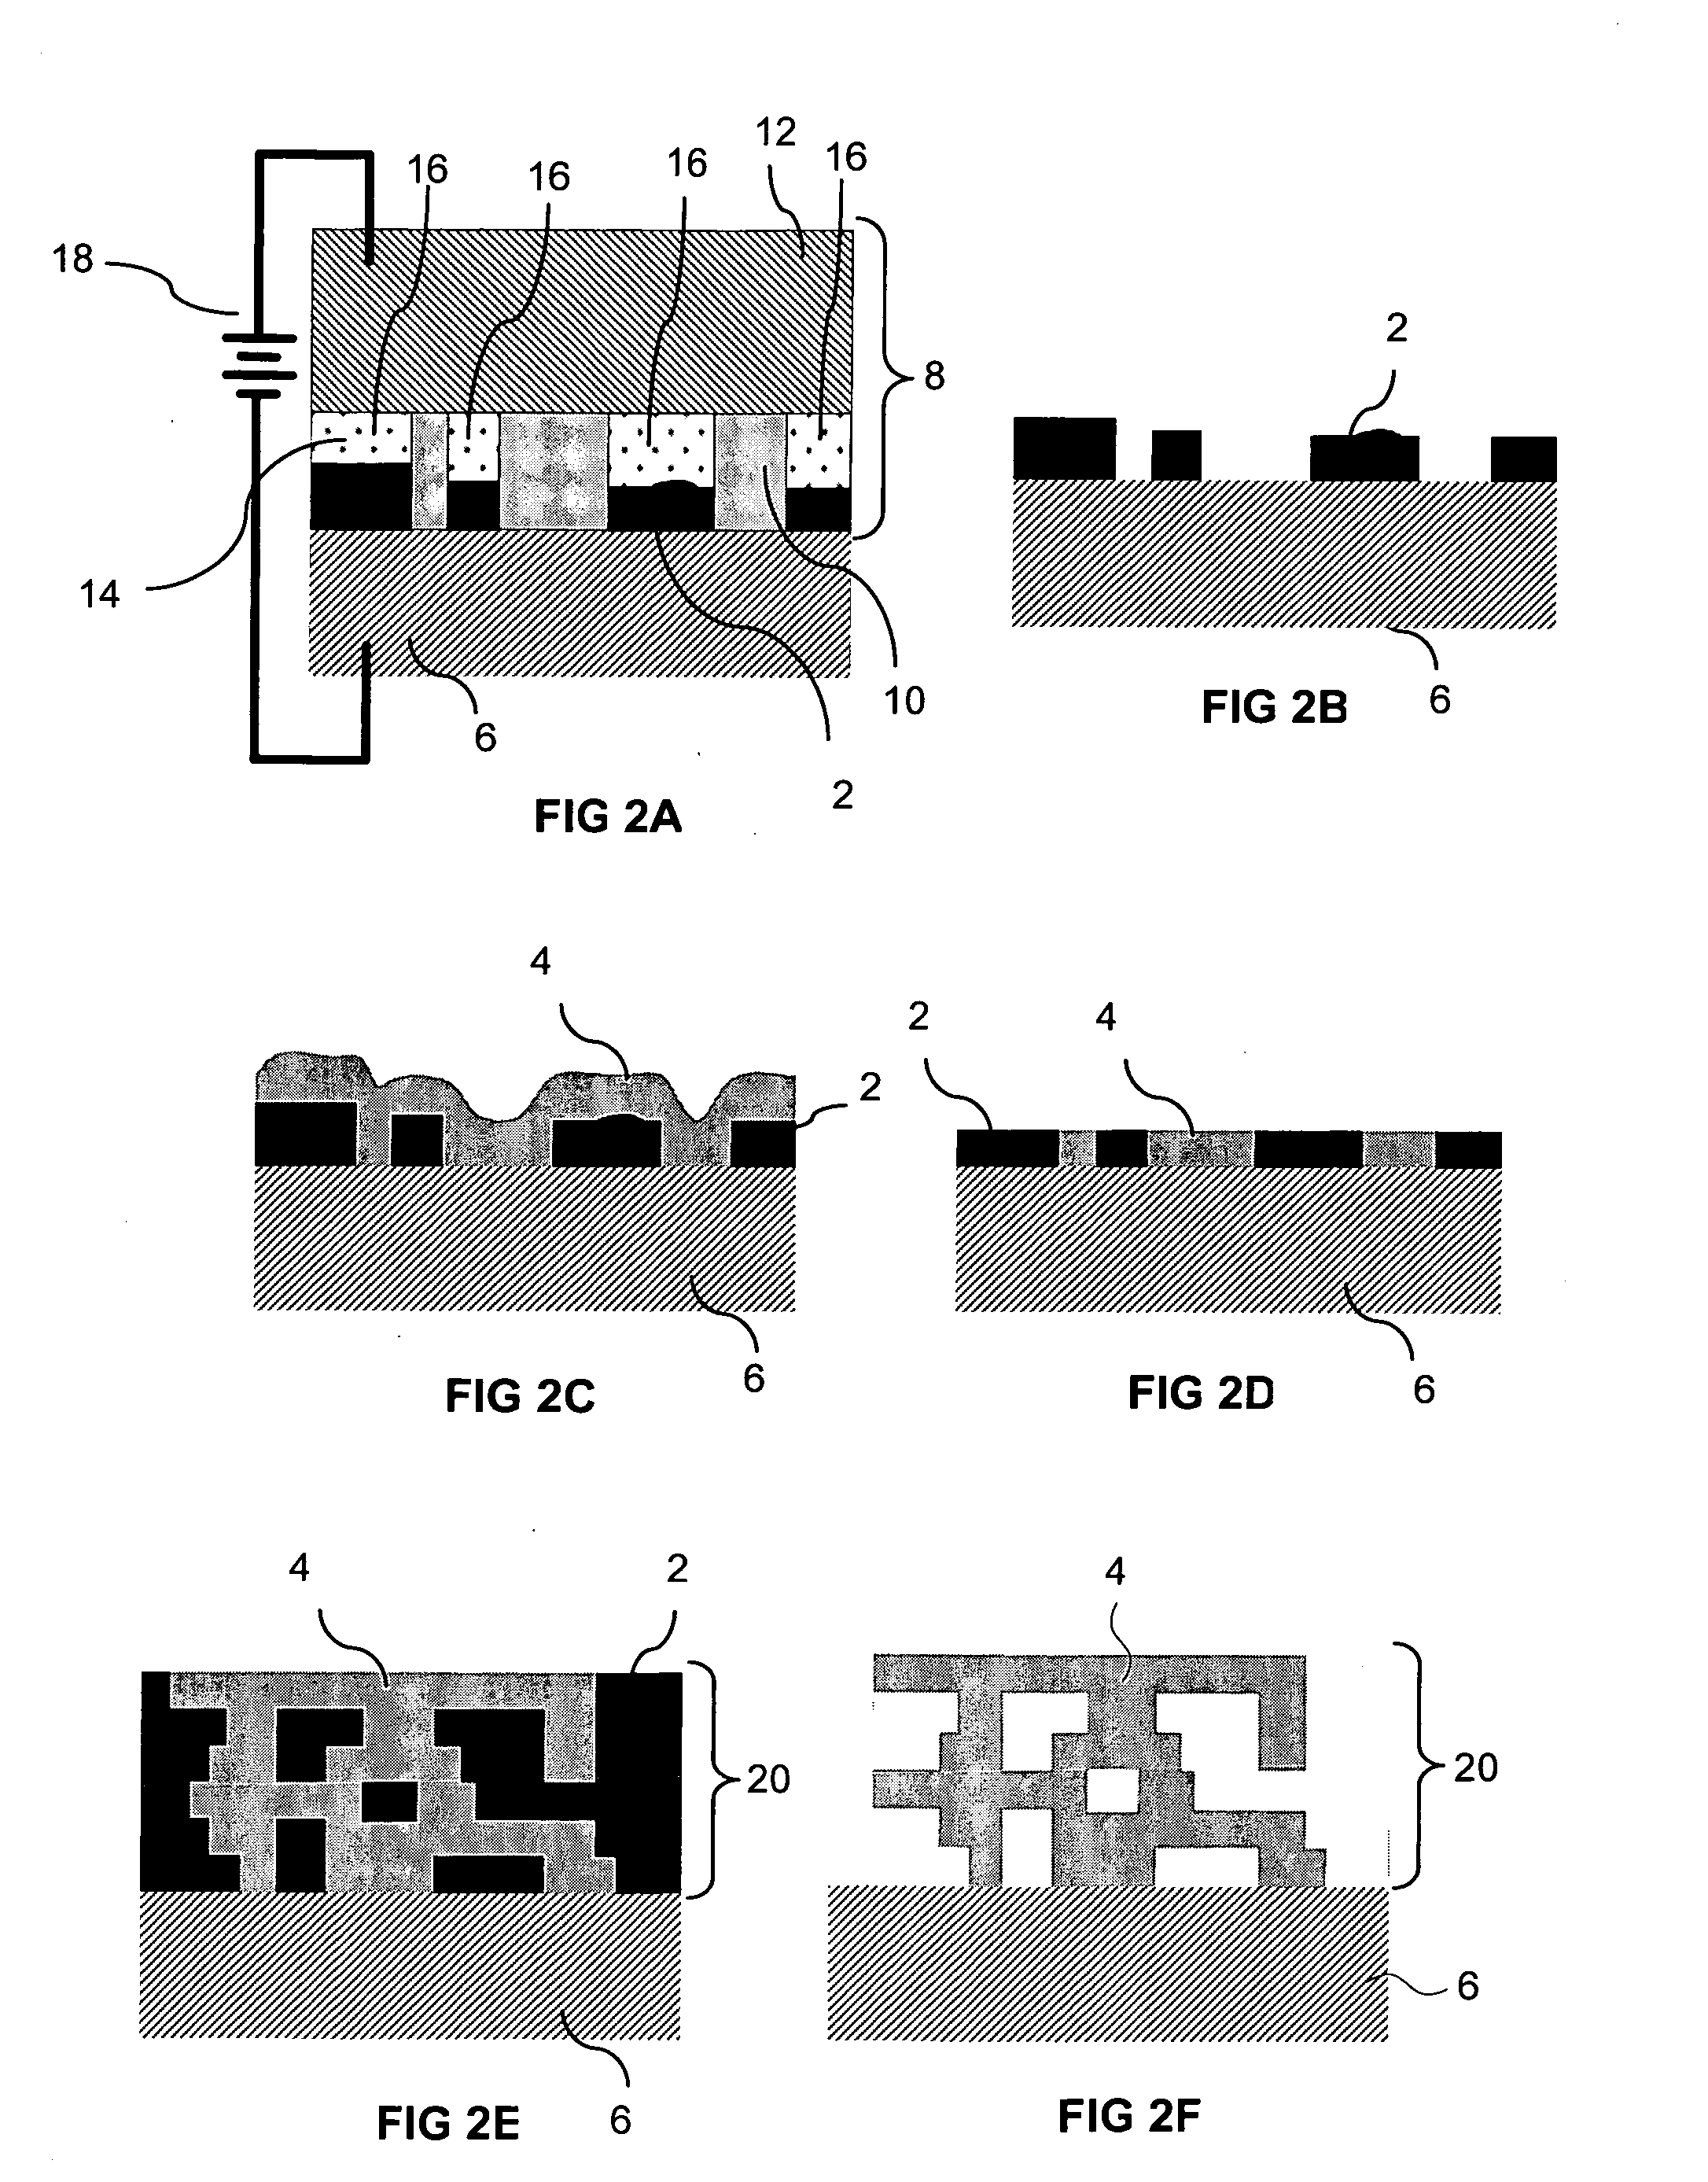 Method for electrochemically fabricating three-dimensional structures including pseudo-rasterization of data